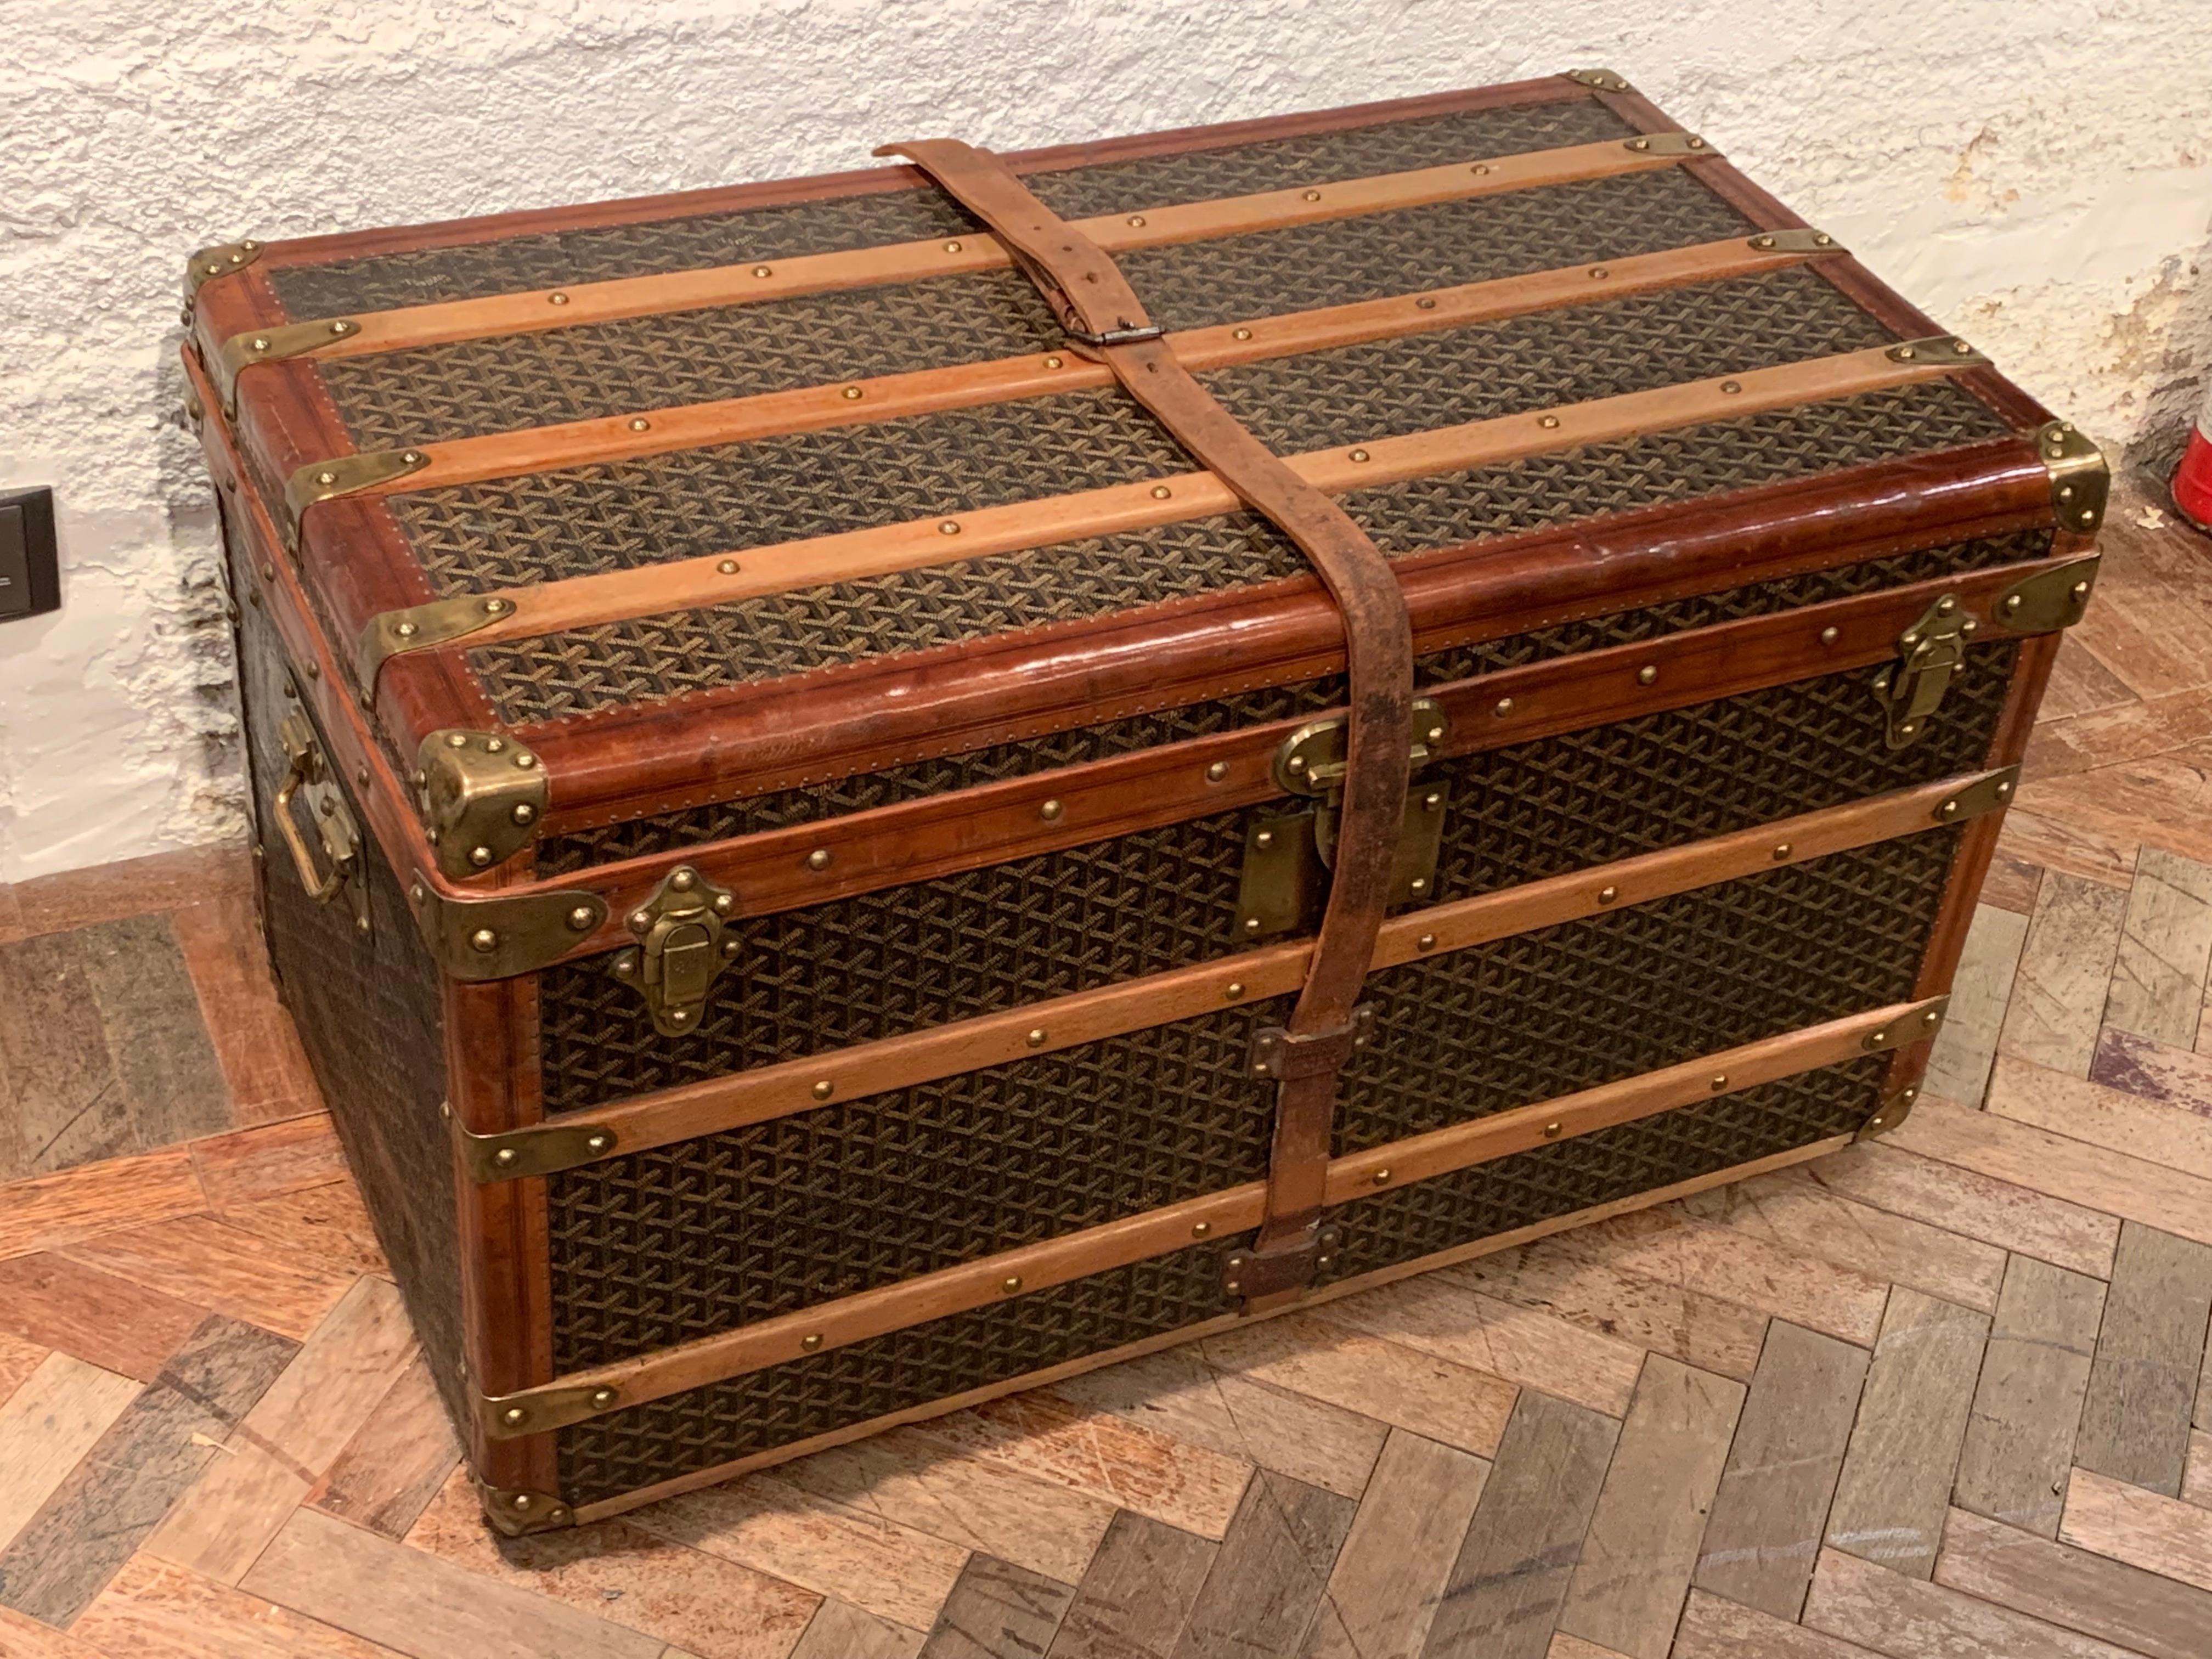 A beautiful Steamer trunk that is entirely covered with the signature Chevron canvas from Goyard circa 1930s. 

It features:
- Lozine trim, 
- Wooden slats 
- Brass hardware. 
- the leather straps 


The spacious interior features the